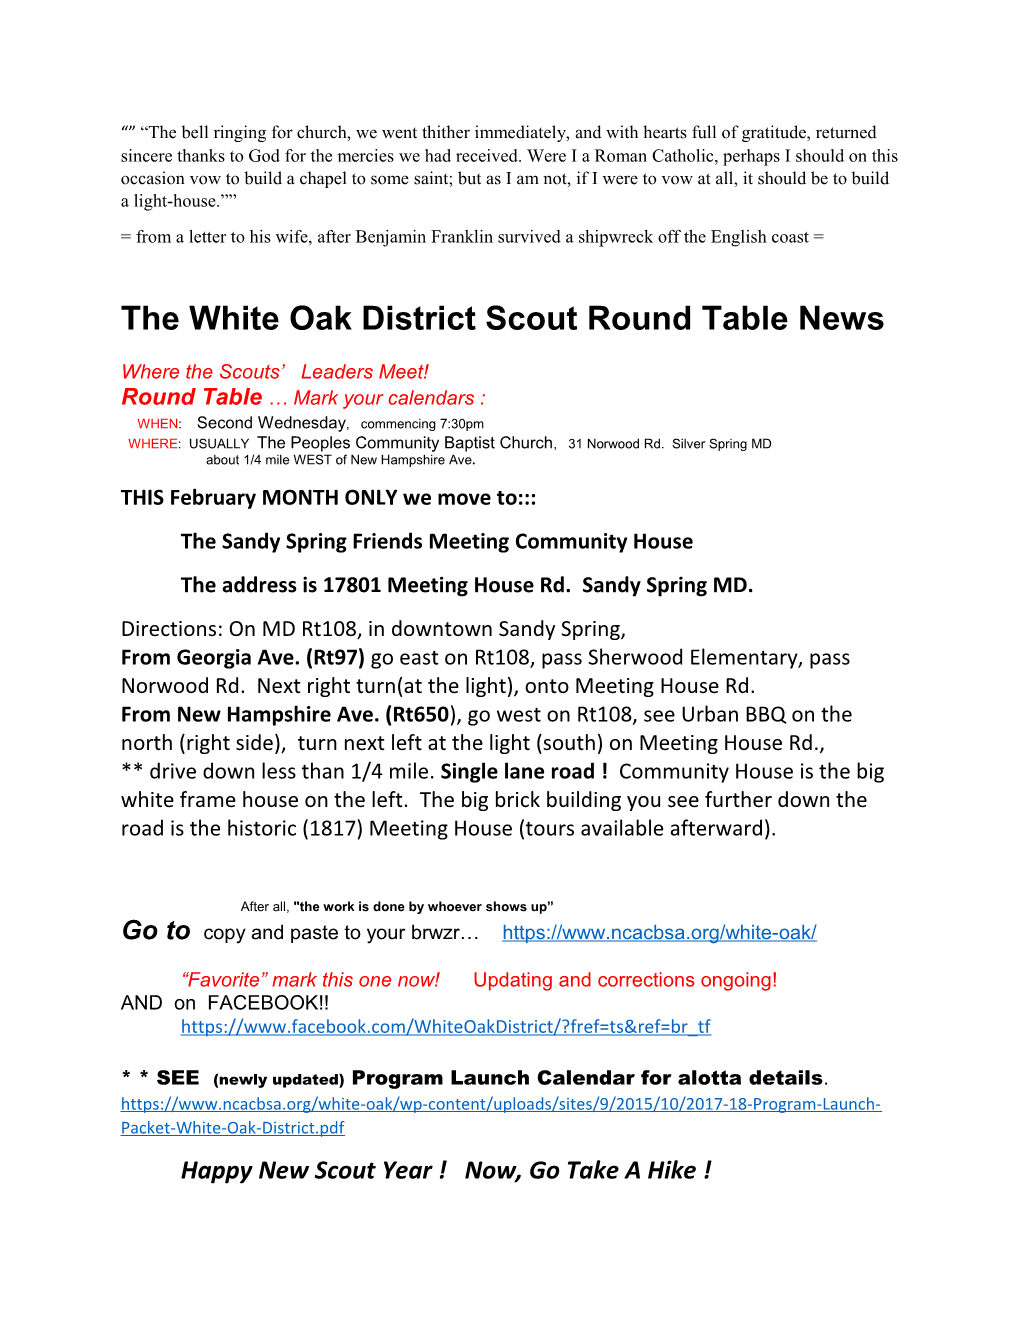 The White Oak District Scout Round Table News